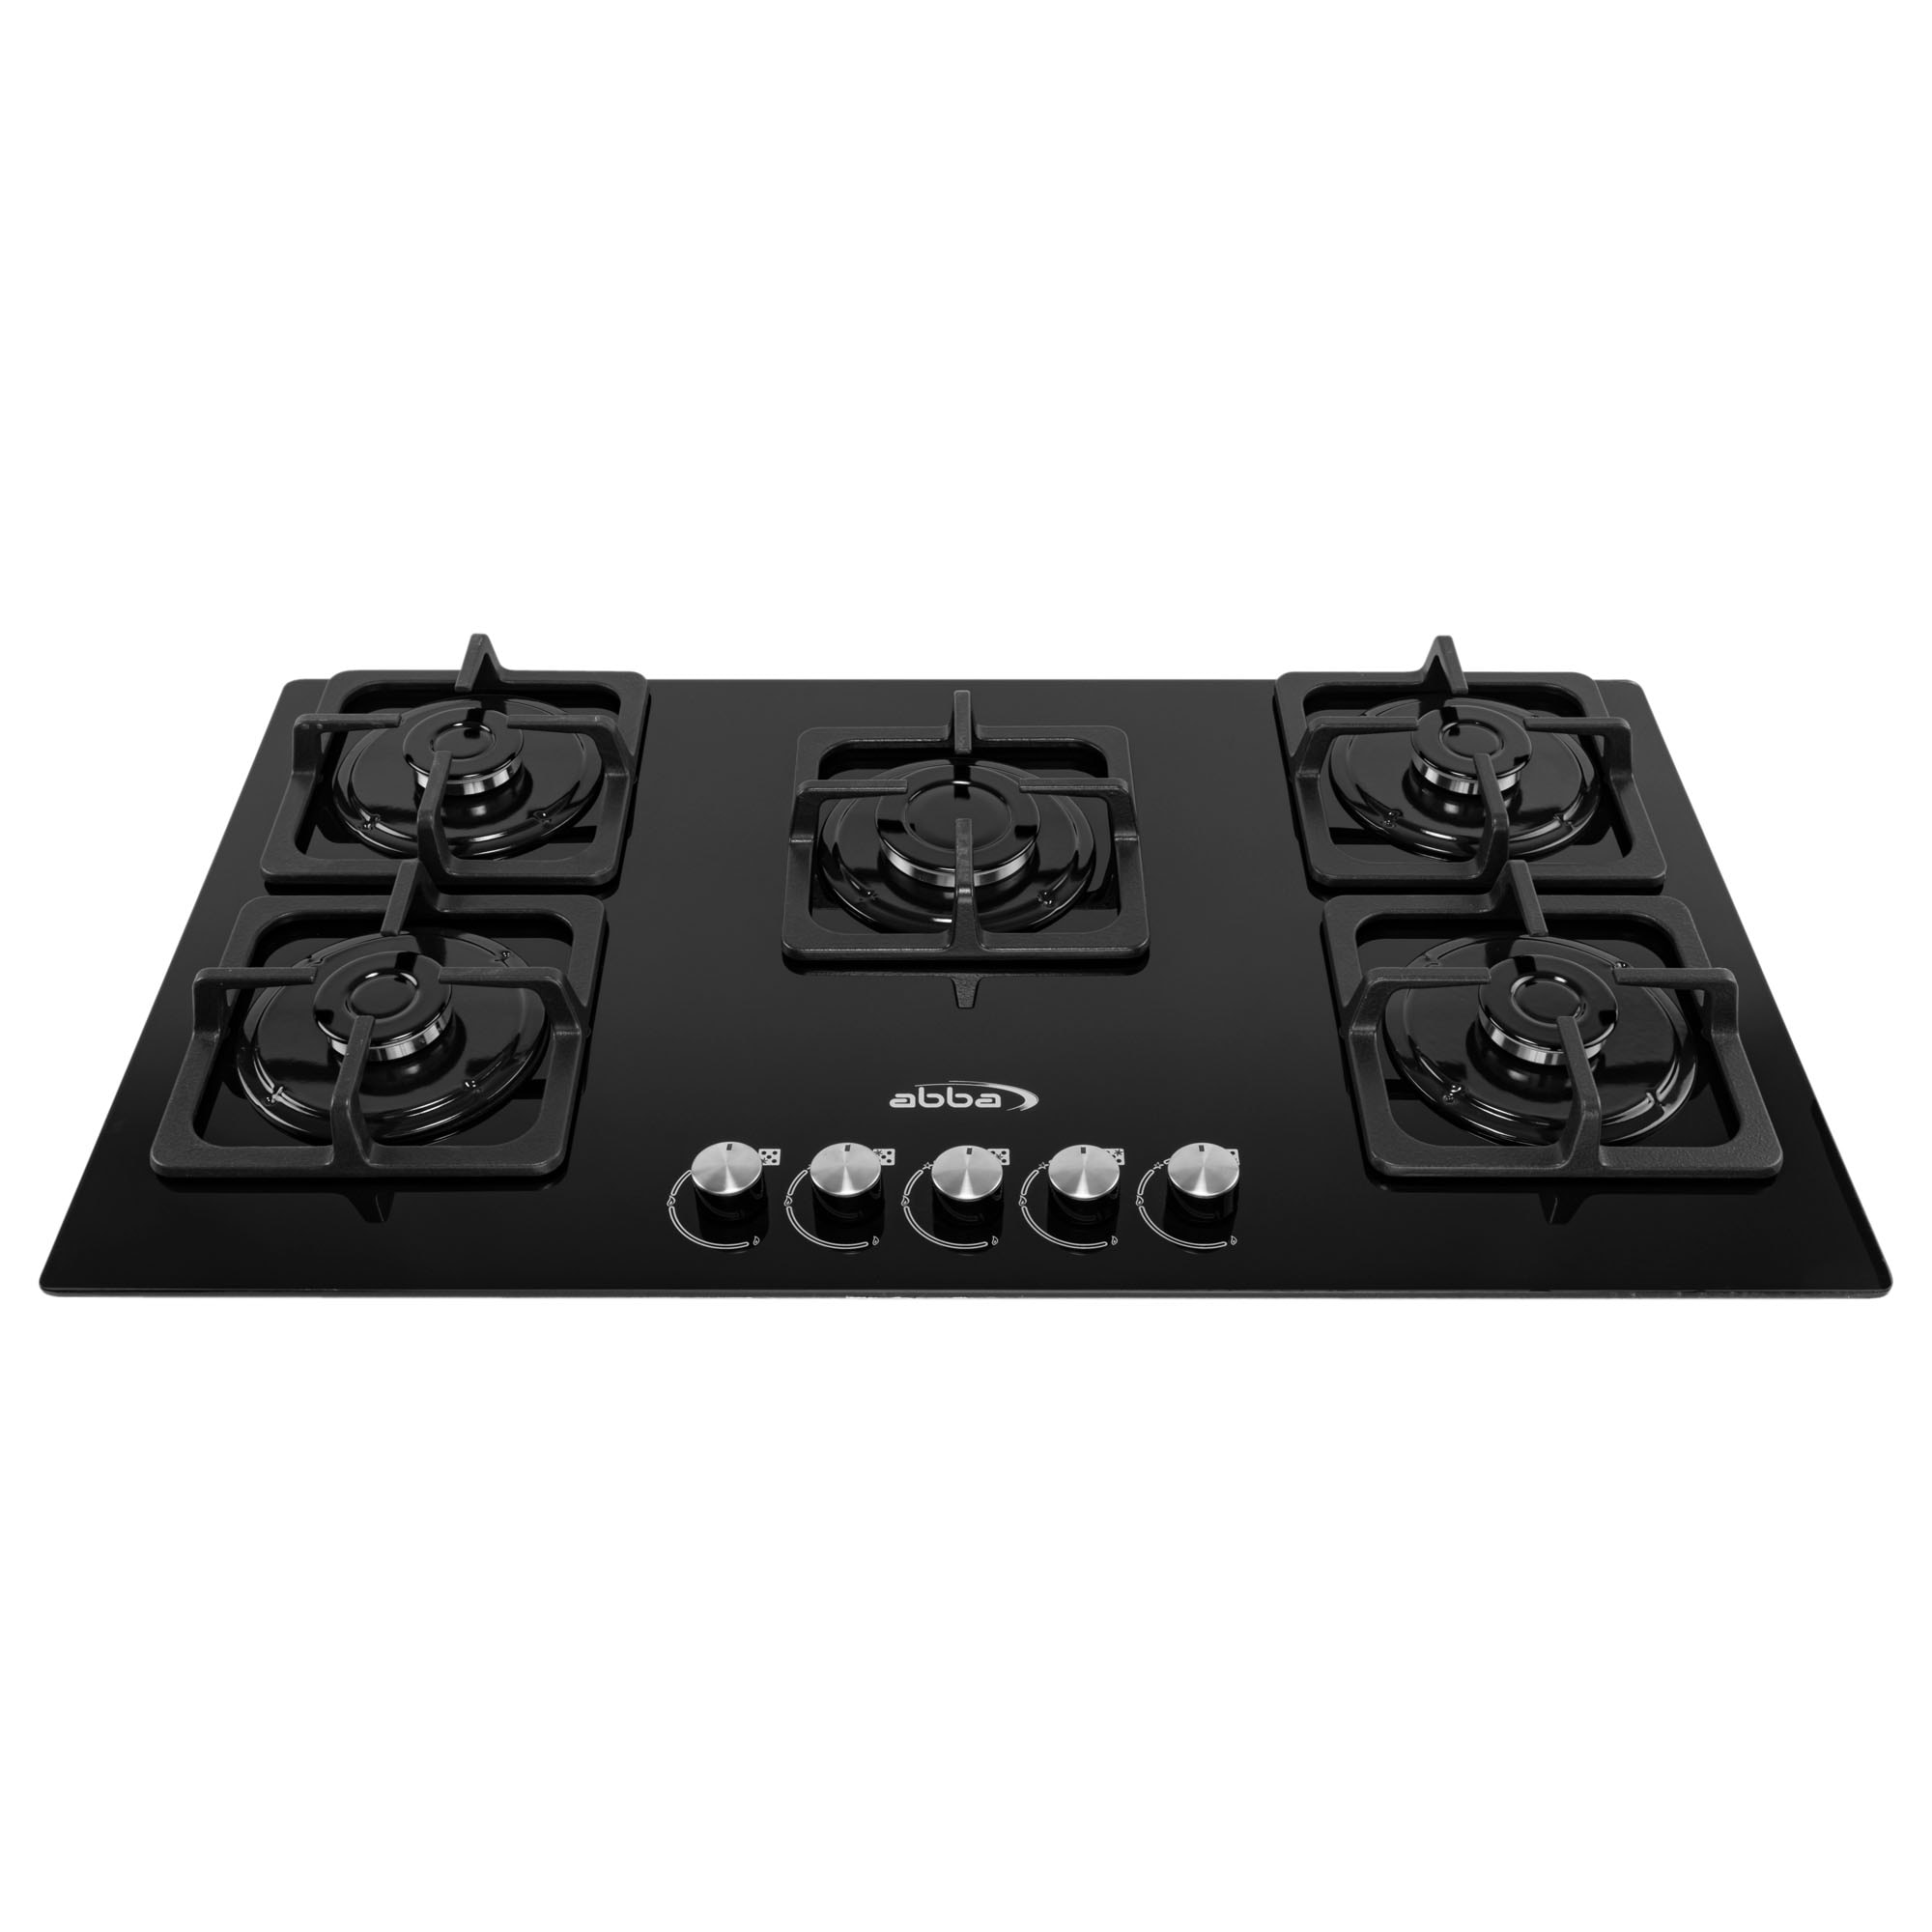 ABBA 36 Gas Cooktop with 5 Sealed Burners - Tempered Glass Surface with  SABAF Burners, Natural Gas Stove for Countertop, Home Improvement  Essentials